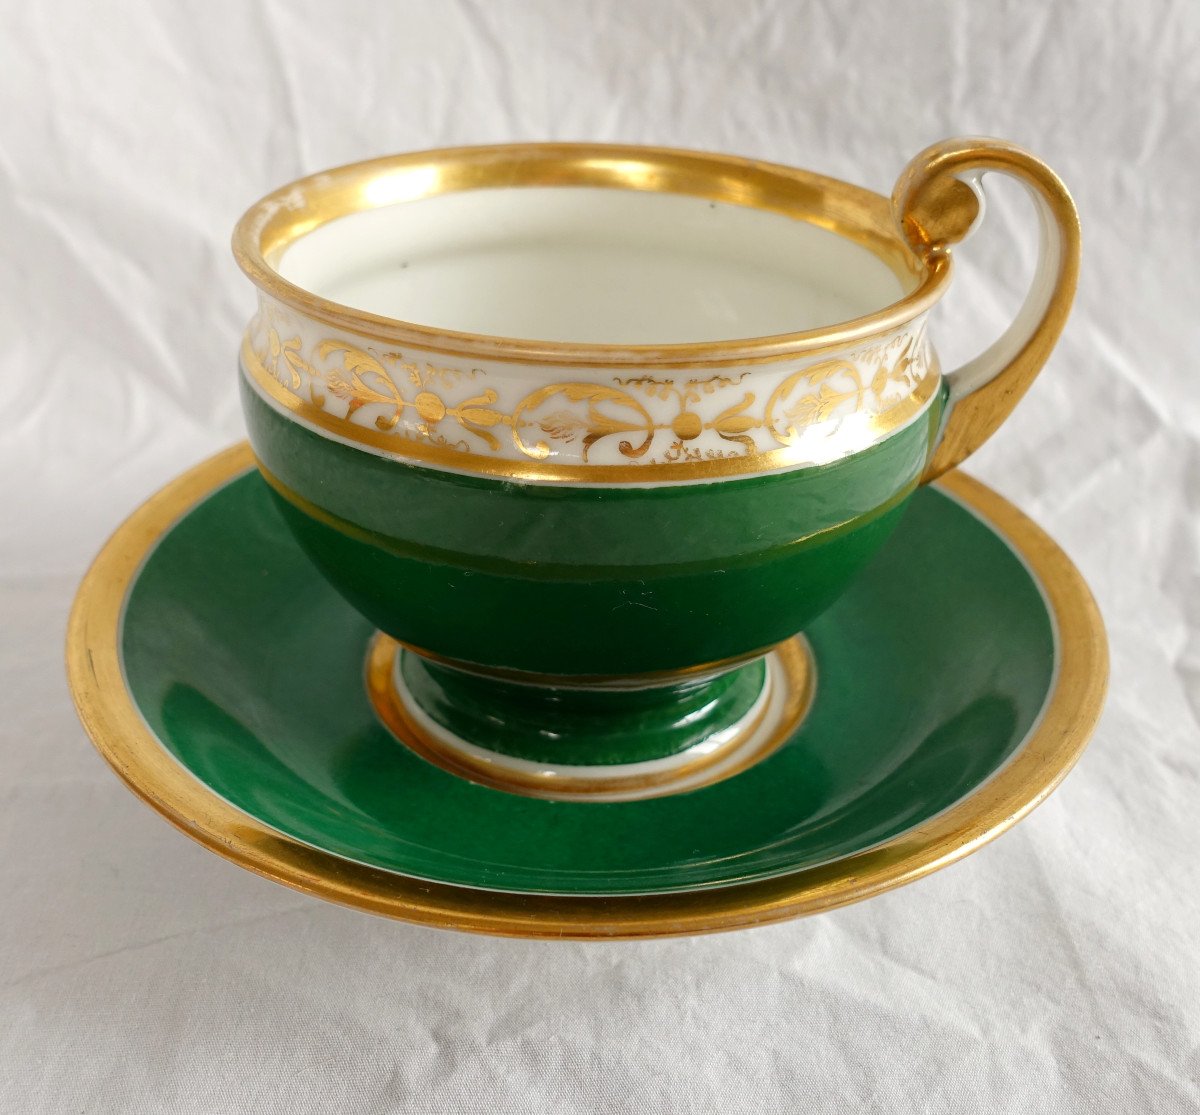 Large Chocolate Cup In Green And Gold Paris Porcelain, Empire Period, Attributed To Nast-photo-6